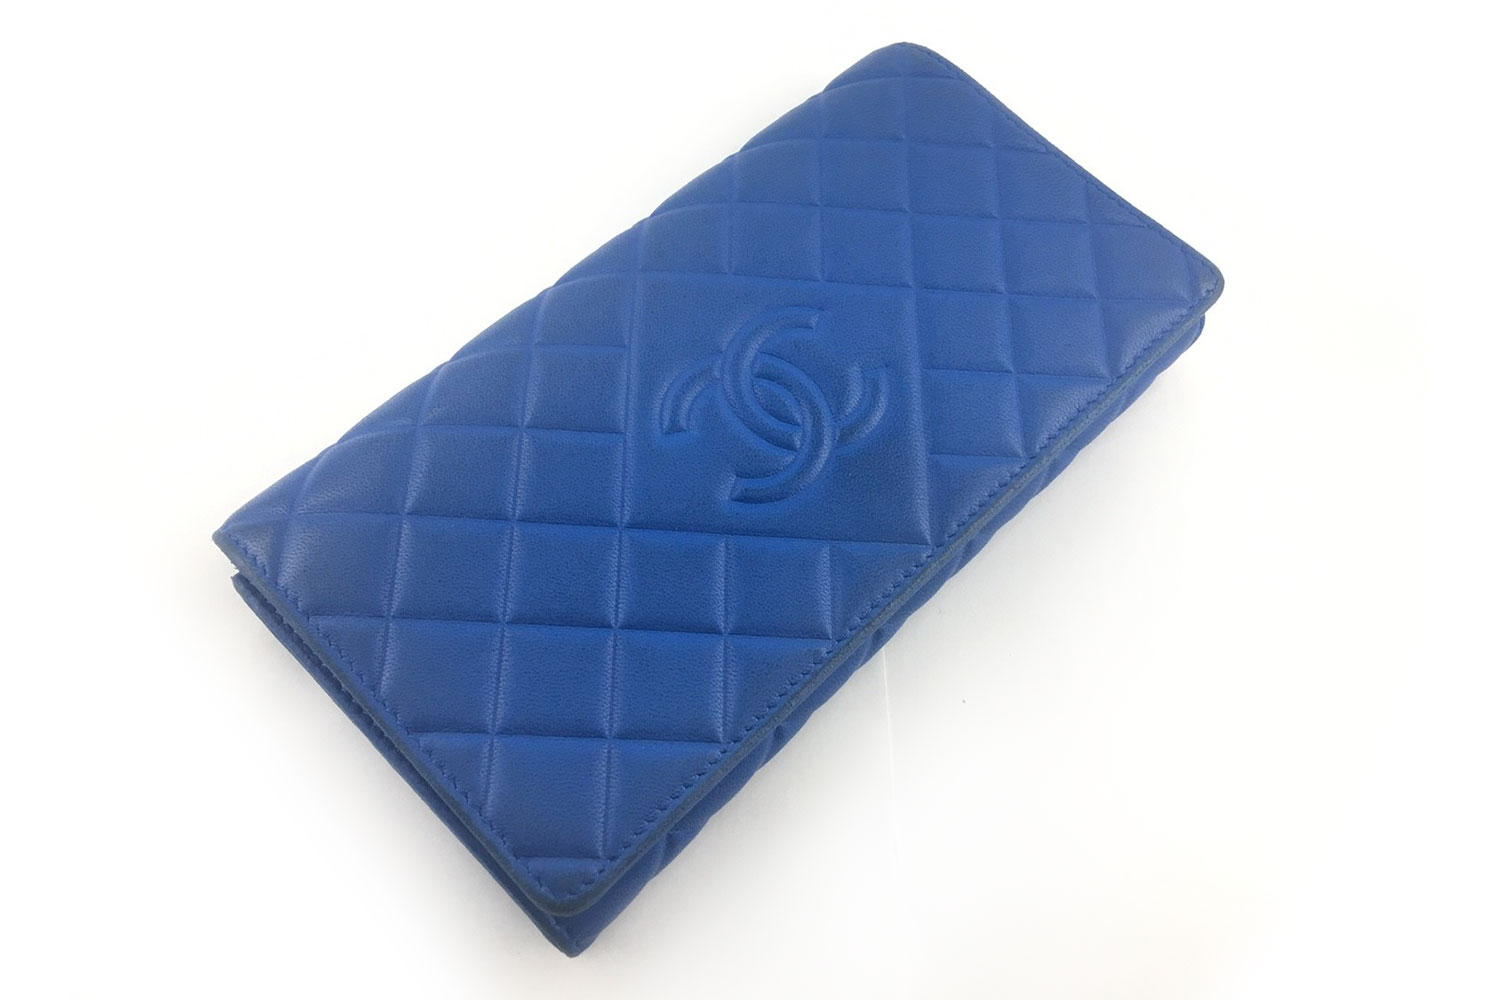 https://leather-pro.com/wp-content/uploads/2019/03/CHANEL_blue_wallet_before_1500.jpg